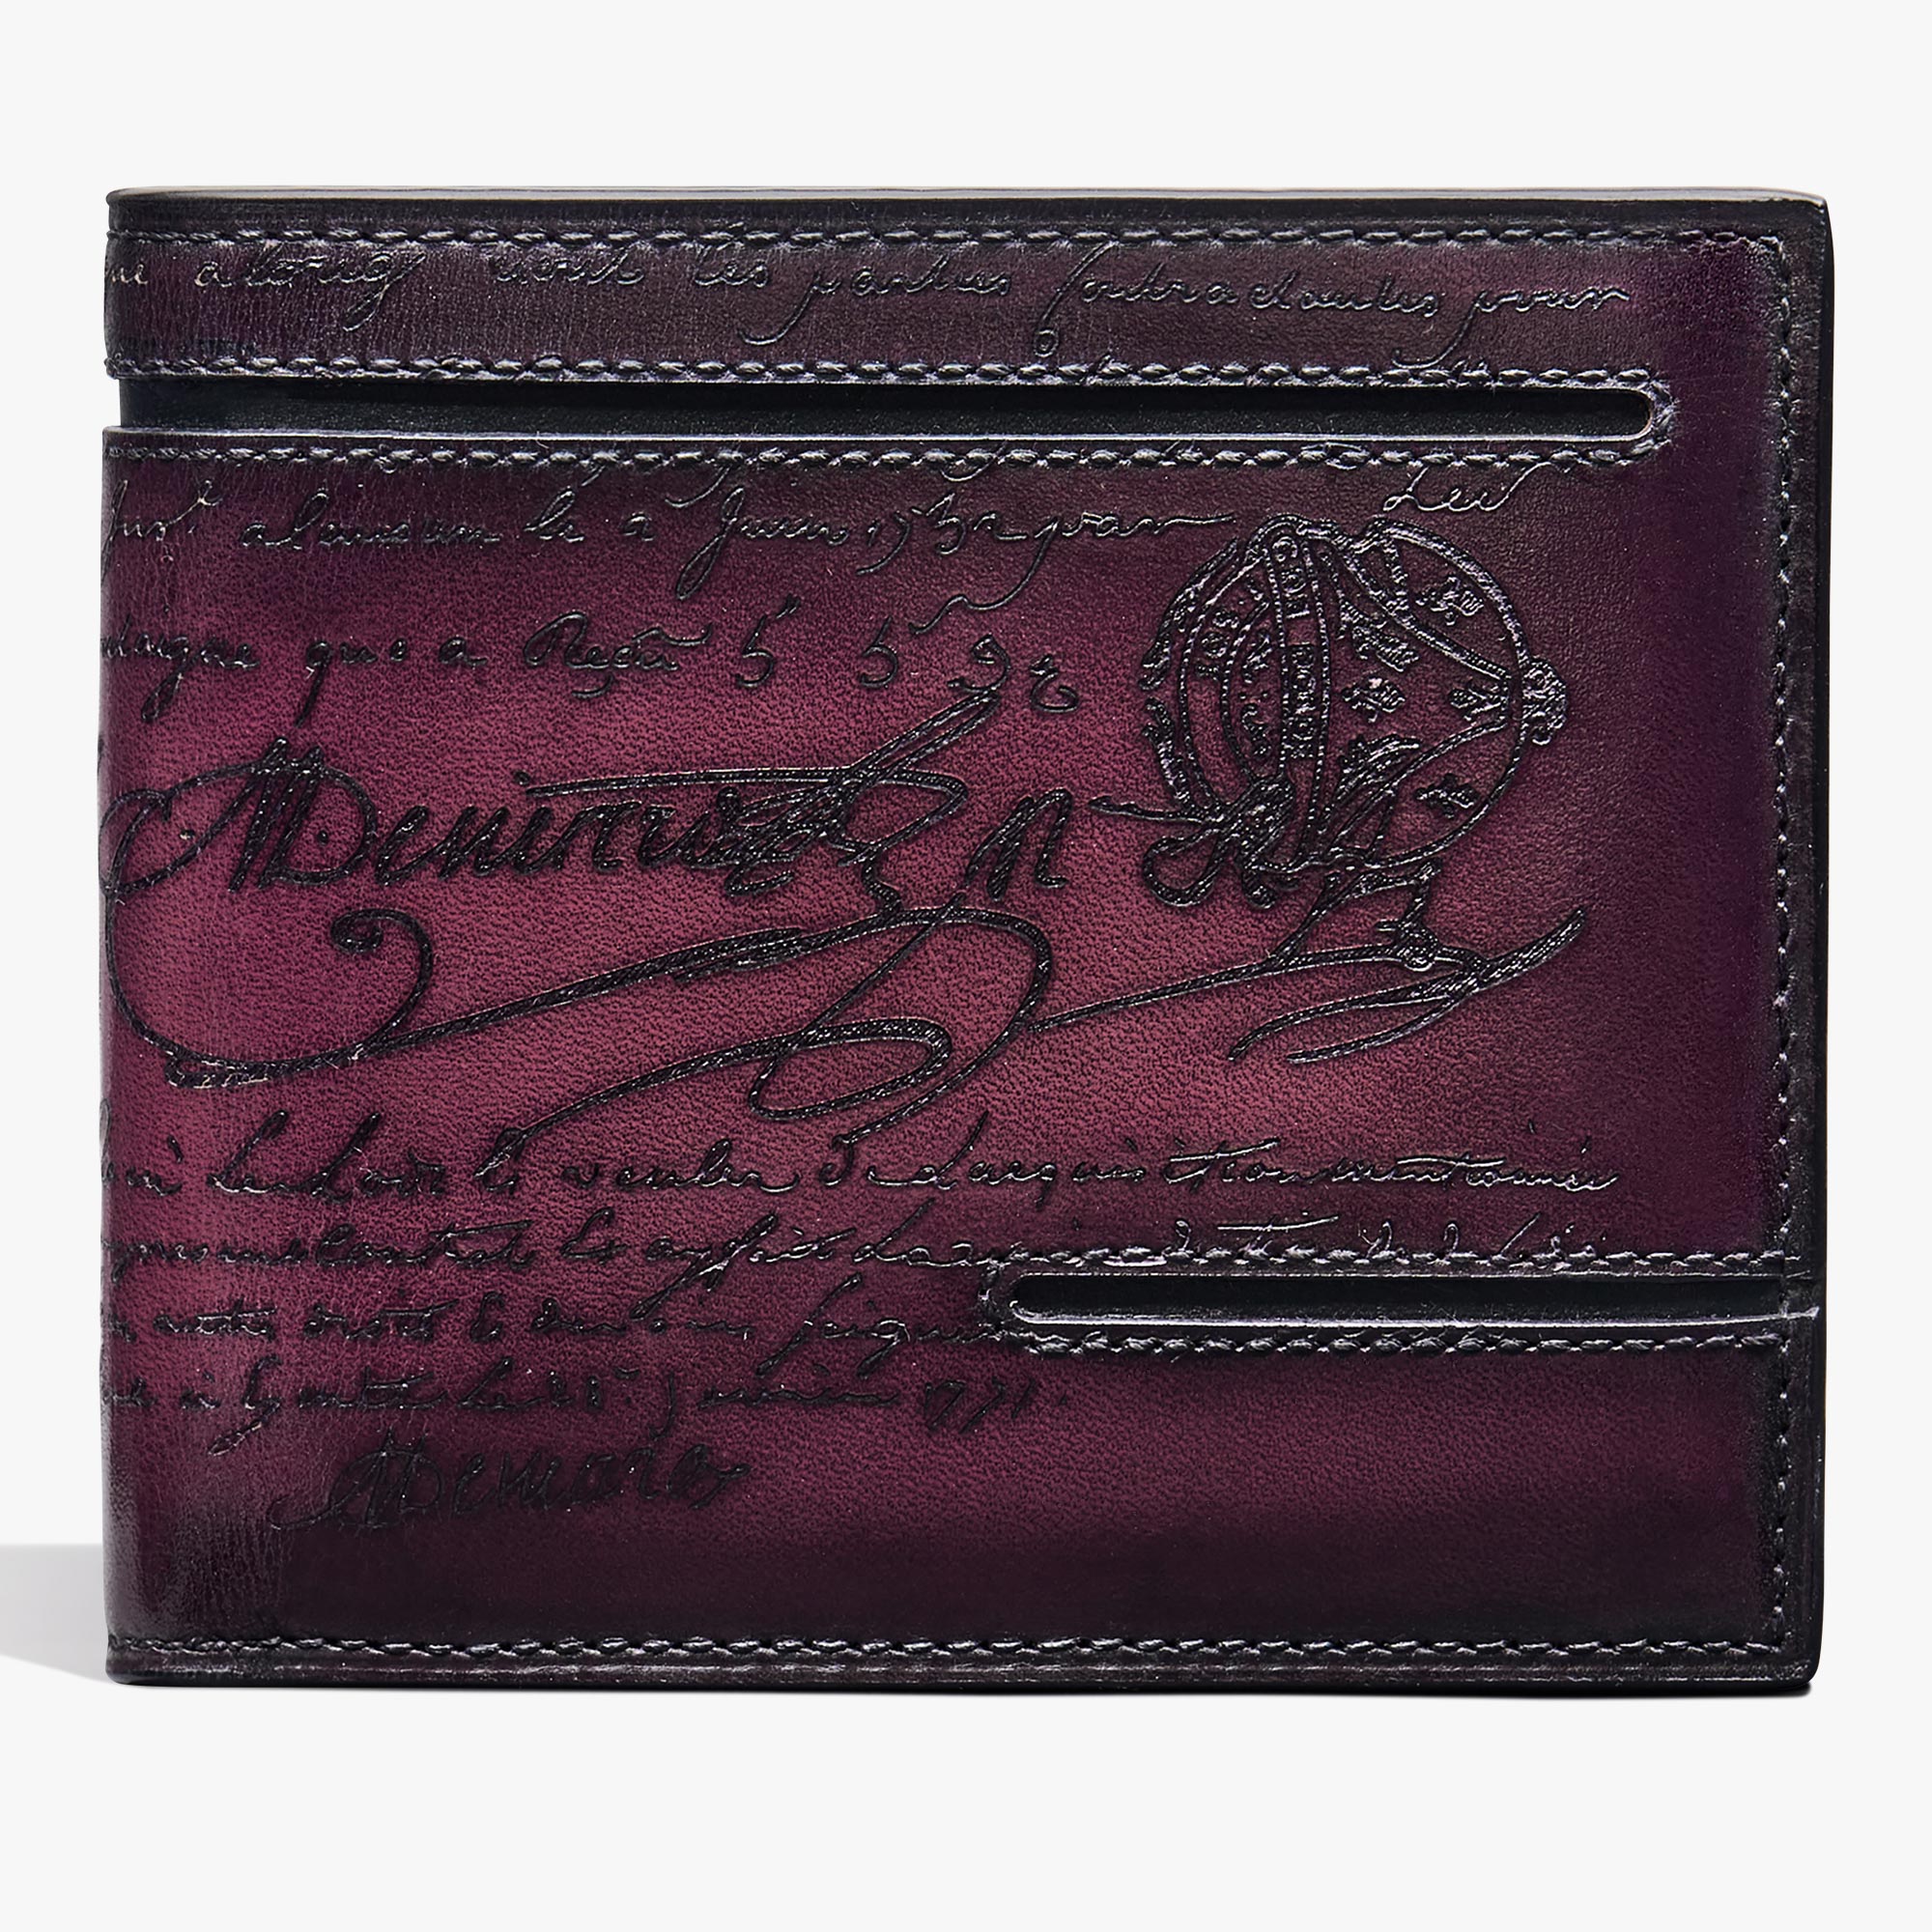 Makore Scritto Leather Wallet, GRAPES, hi-res